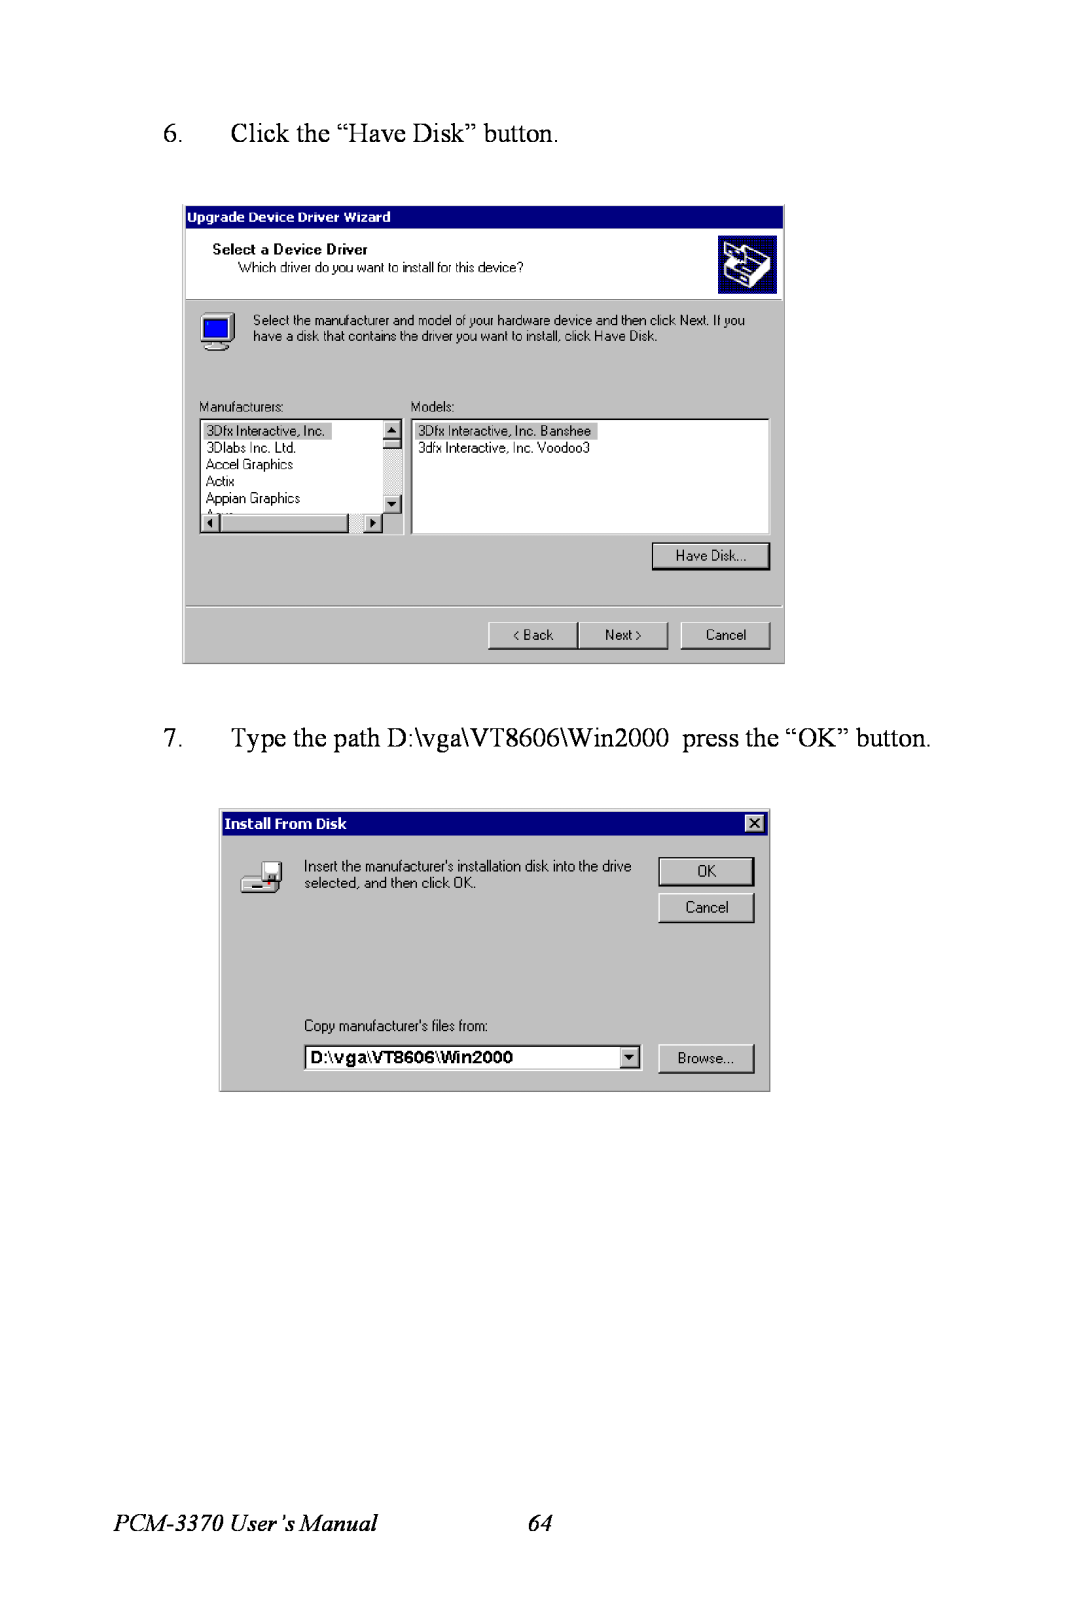 Intel PCM-3370 user manual Click the “Have Disk” button, Type the path D\vga\VT8606\Win2000 press the “OK” button 